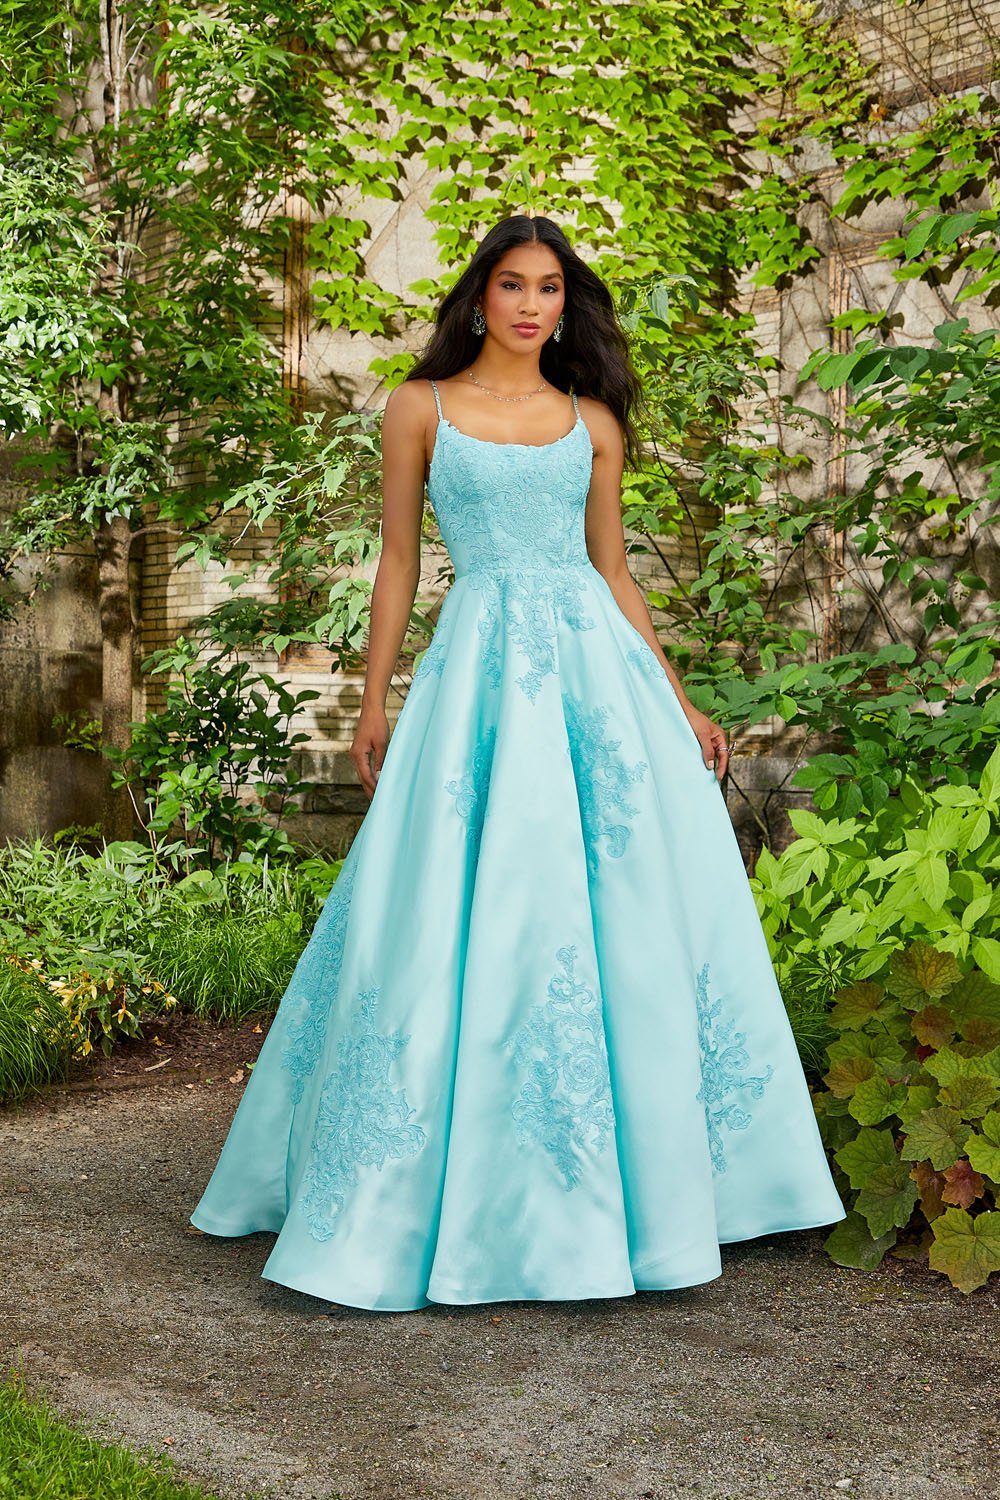 Morilee 47056 by Madeline Gardner dress images. Morilee 47056 is available in these colors: Black, Royal, Aqua, White.